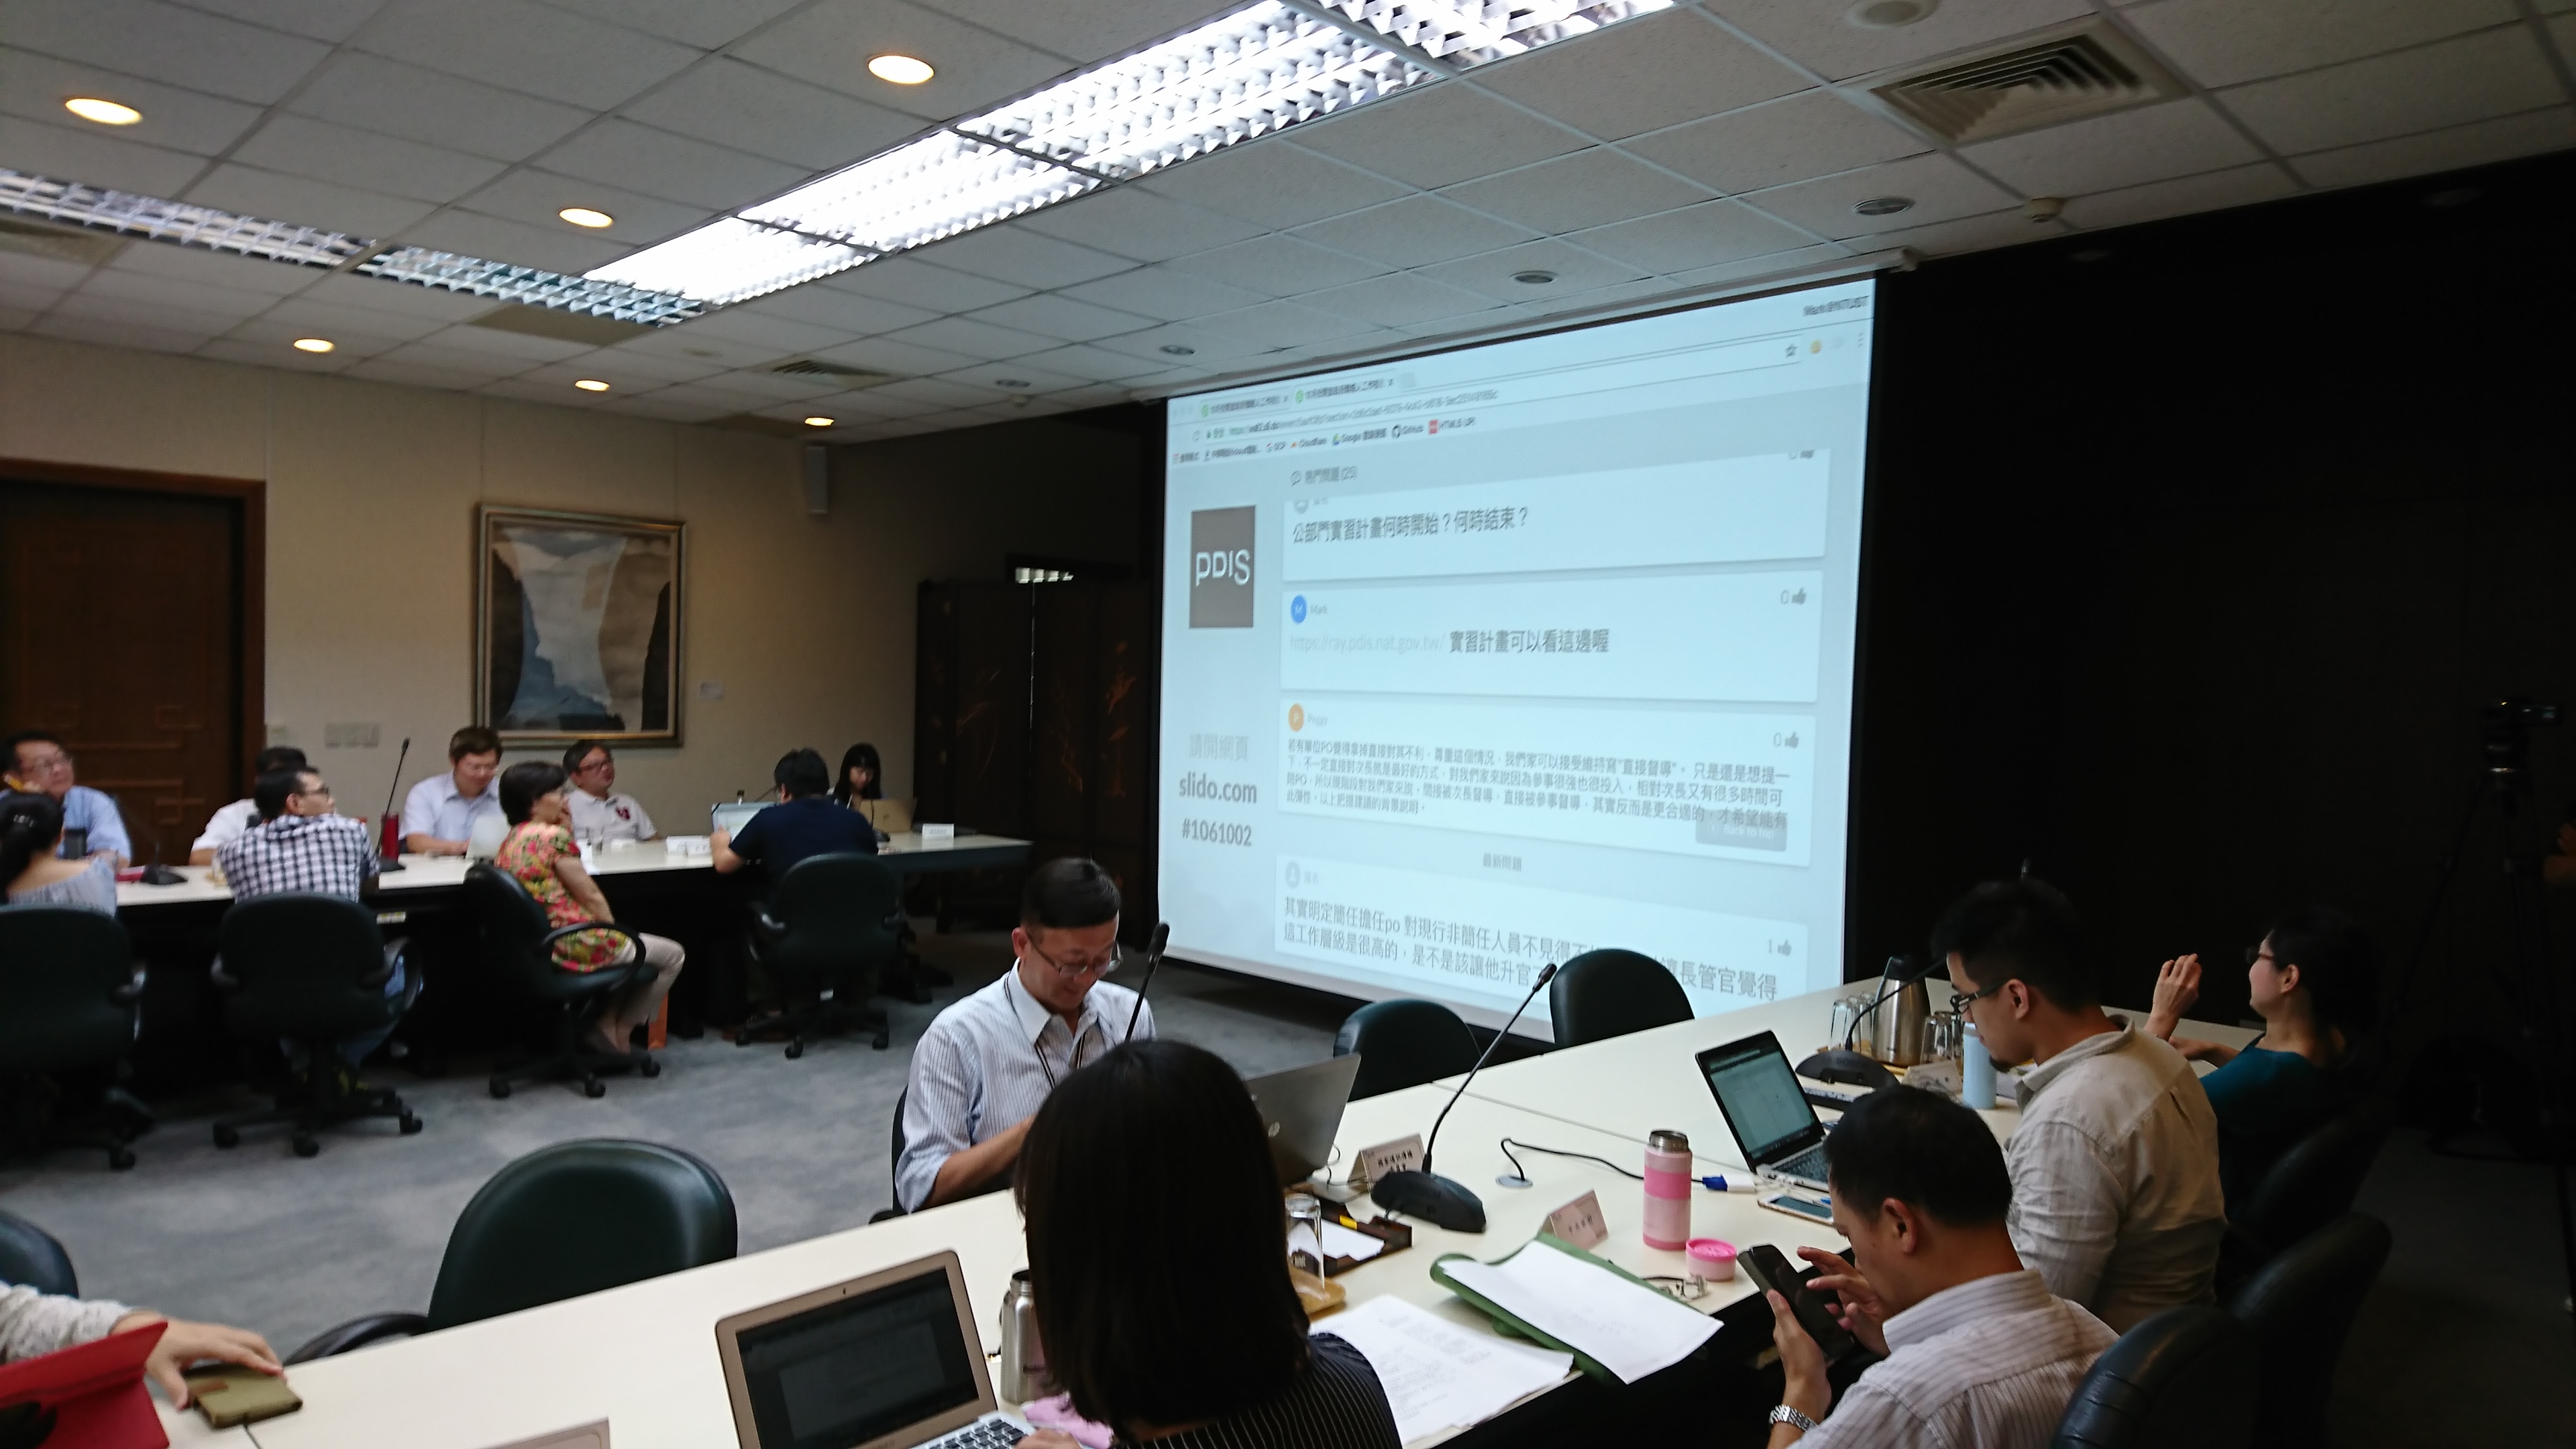 The sli.do is used at the PO monthly meeting to deal with the anonymous questions raised by the participants.